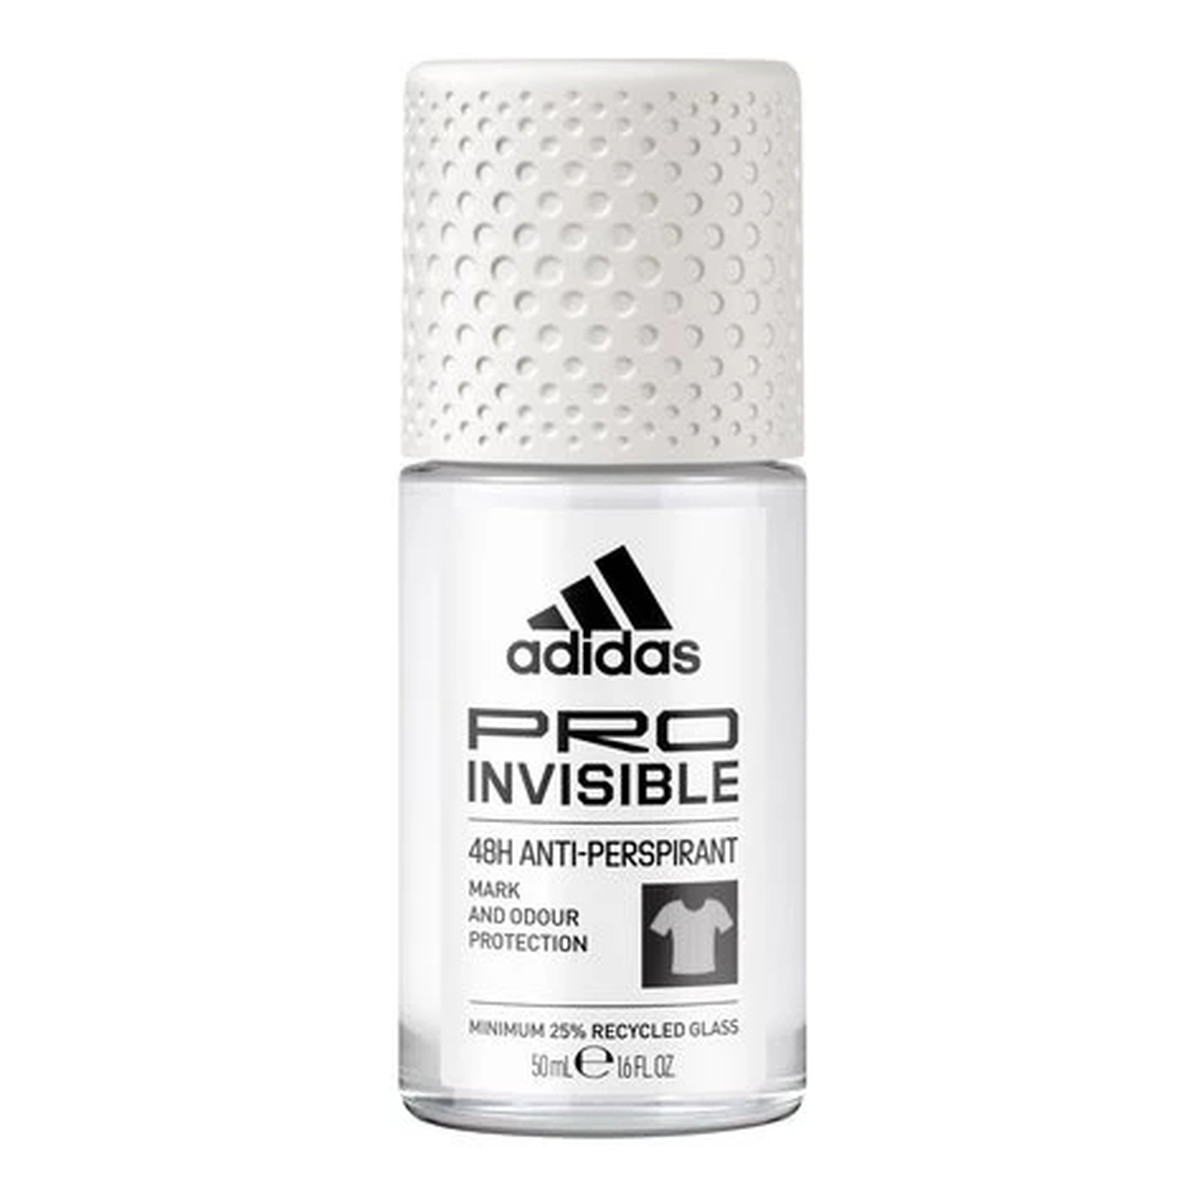 Adidas Pro Invisible Antyperspirant Roll-On 48H 50ml